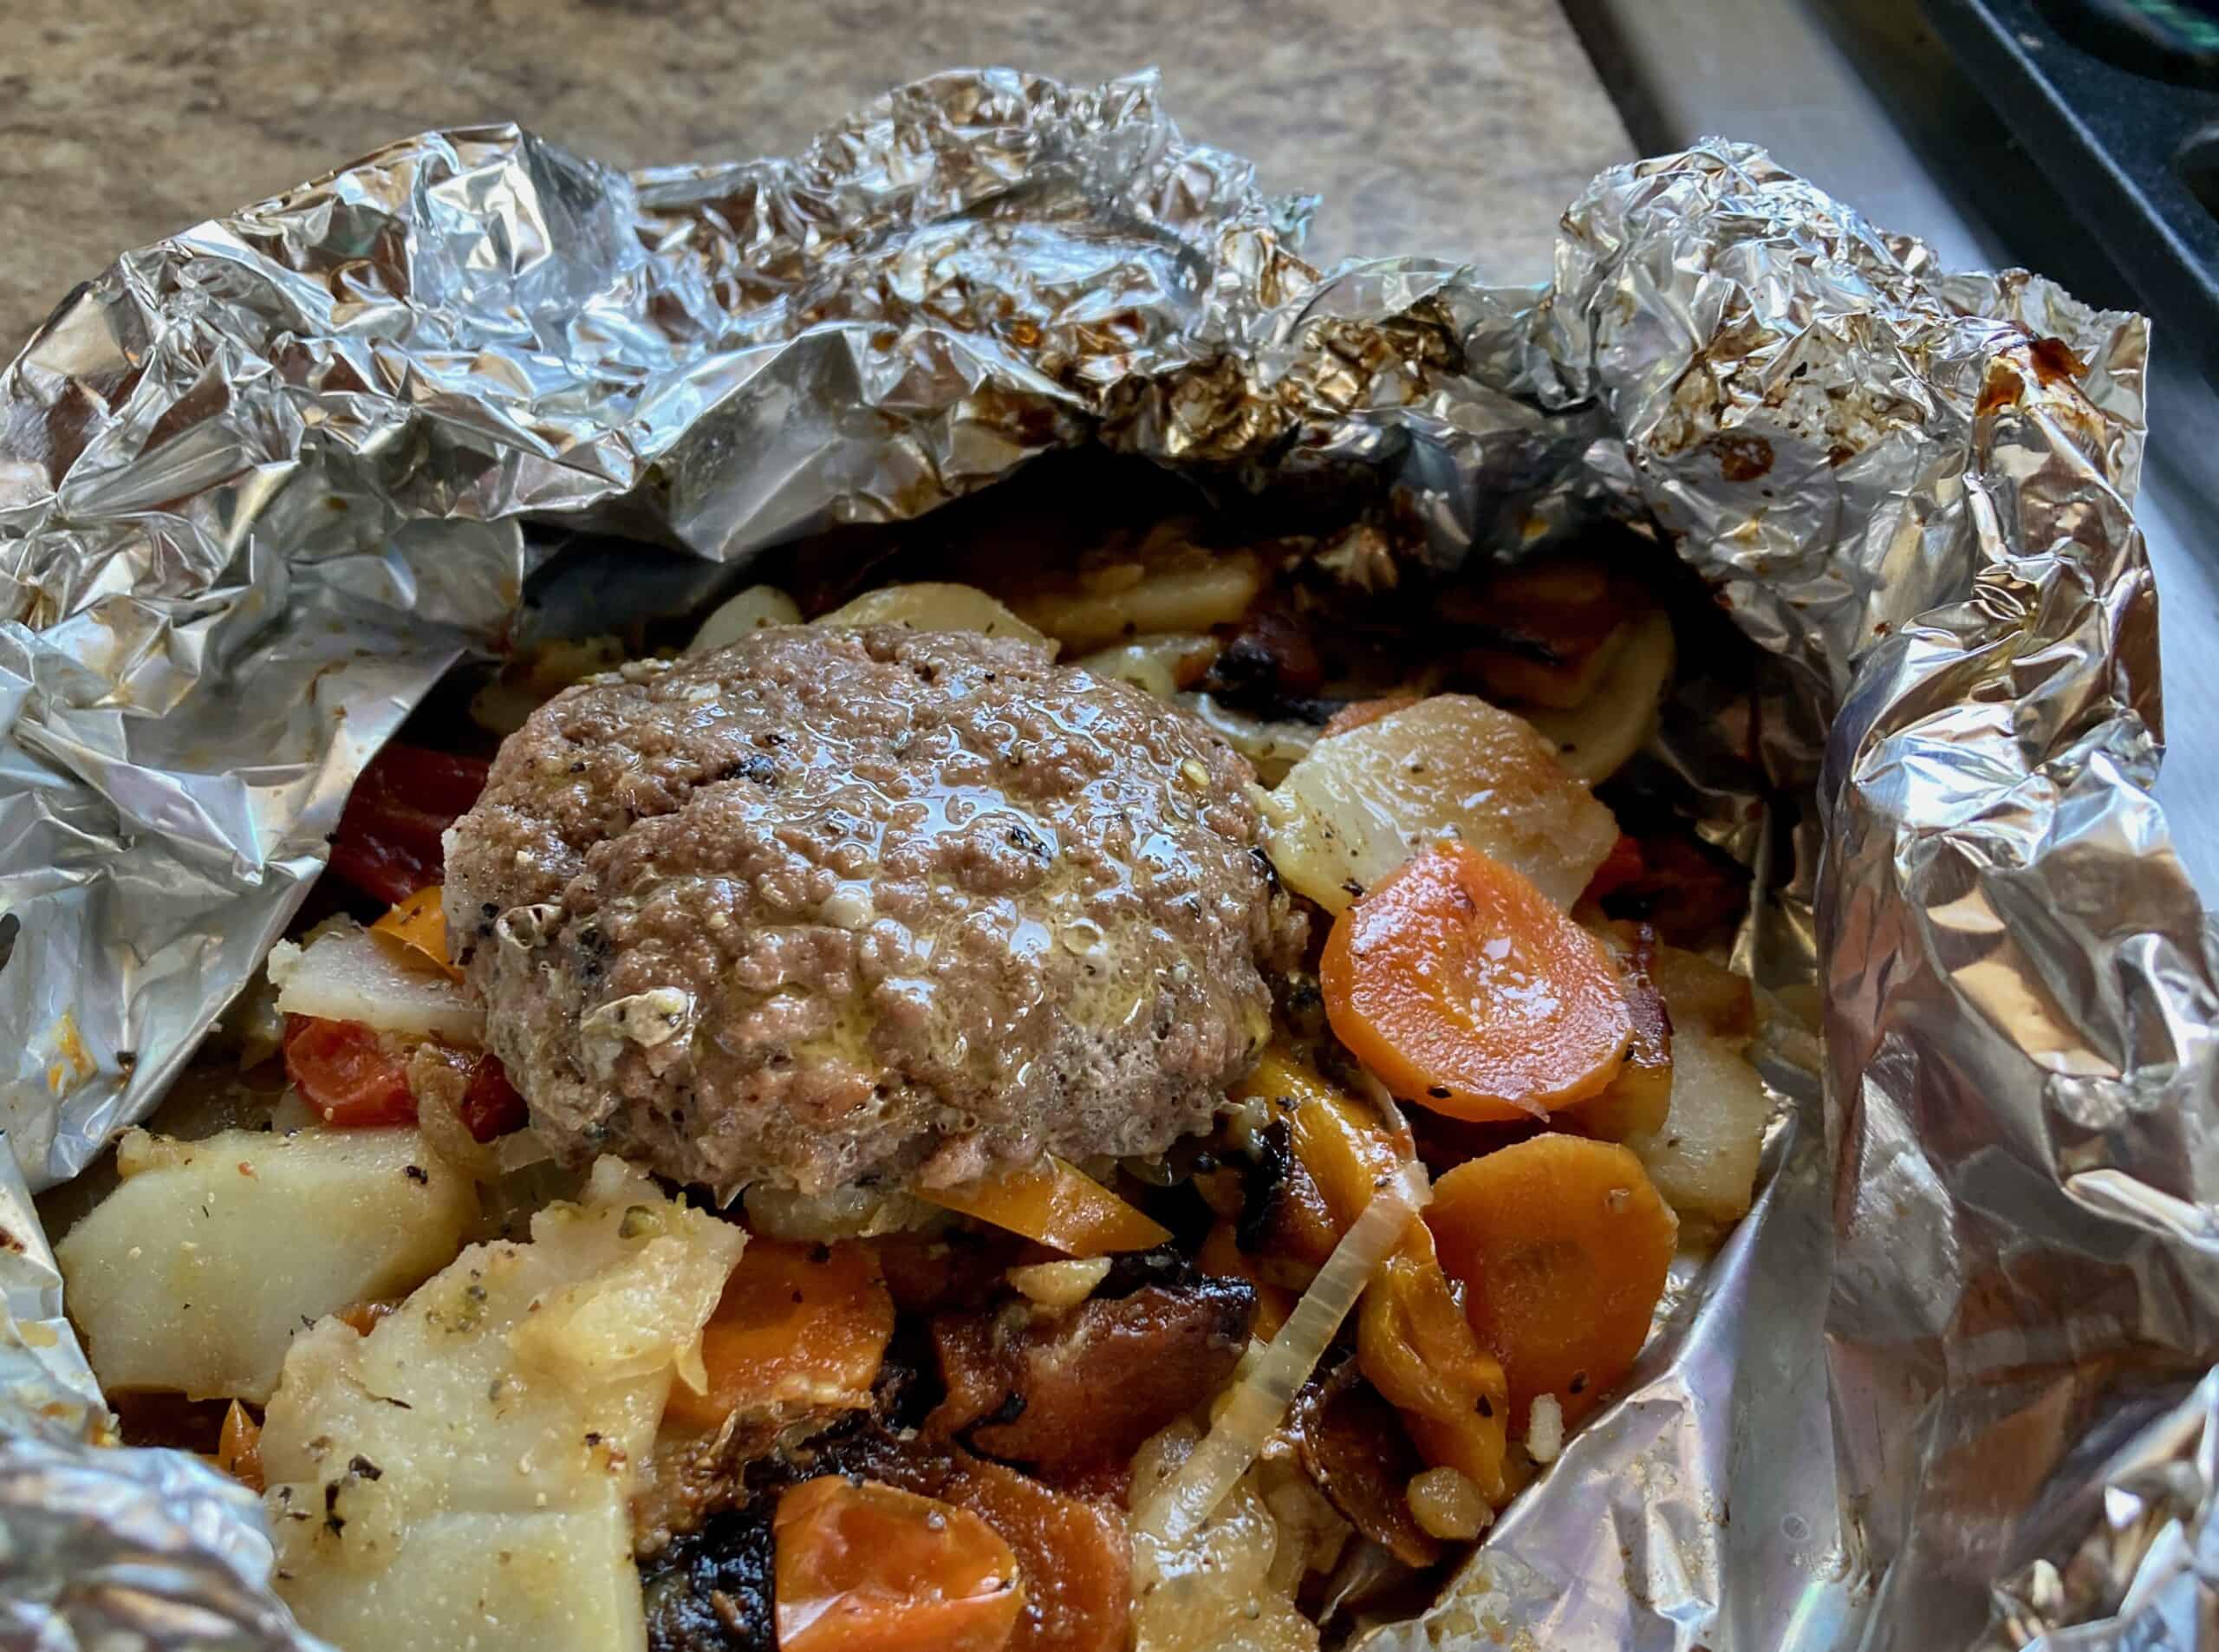 Hamburger and vegetables cooked in foil packet, open and ready to eat.